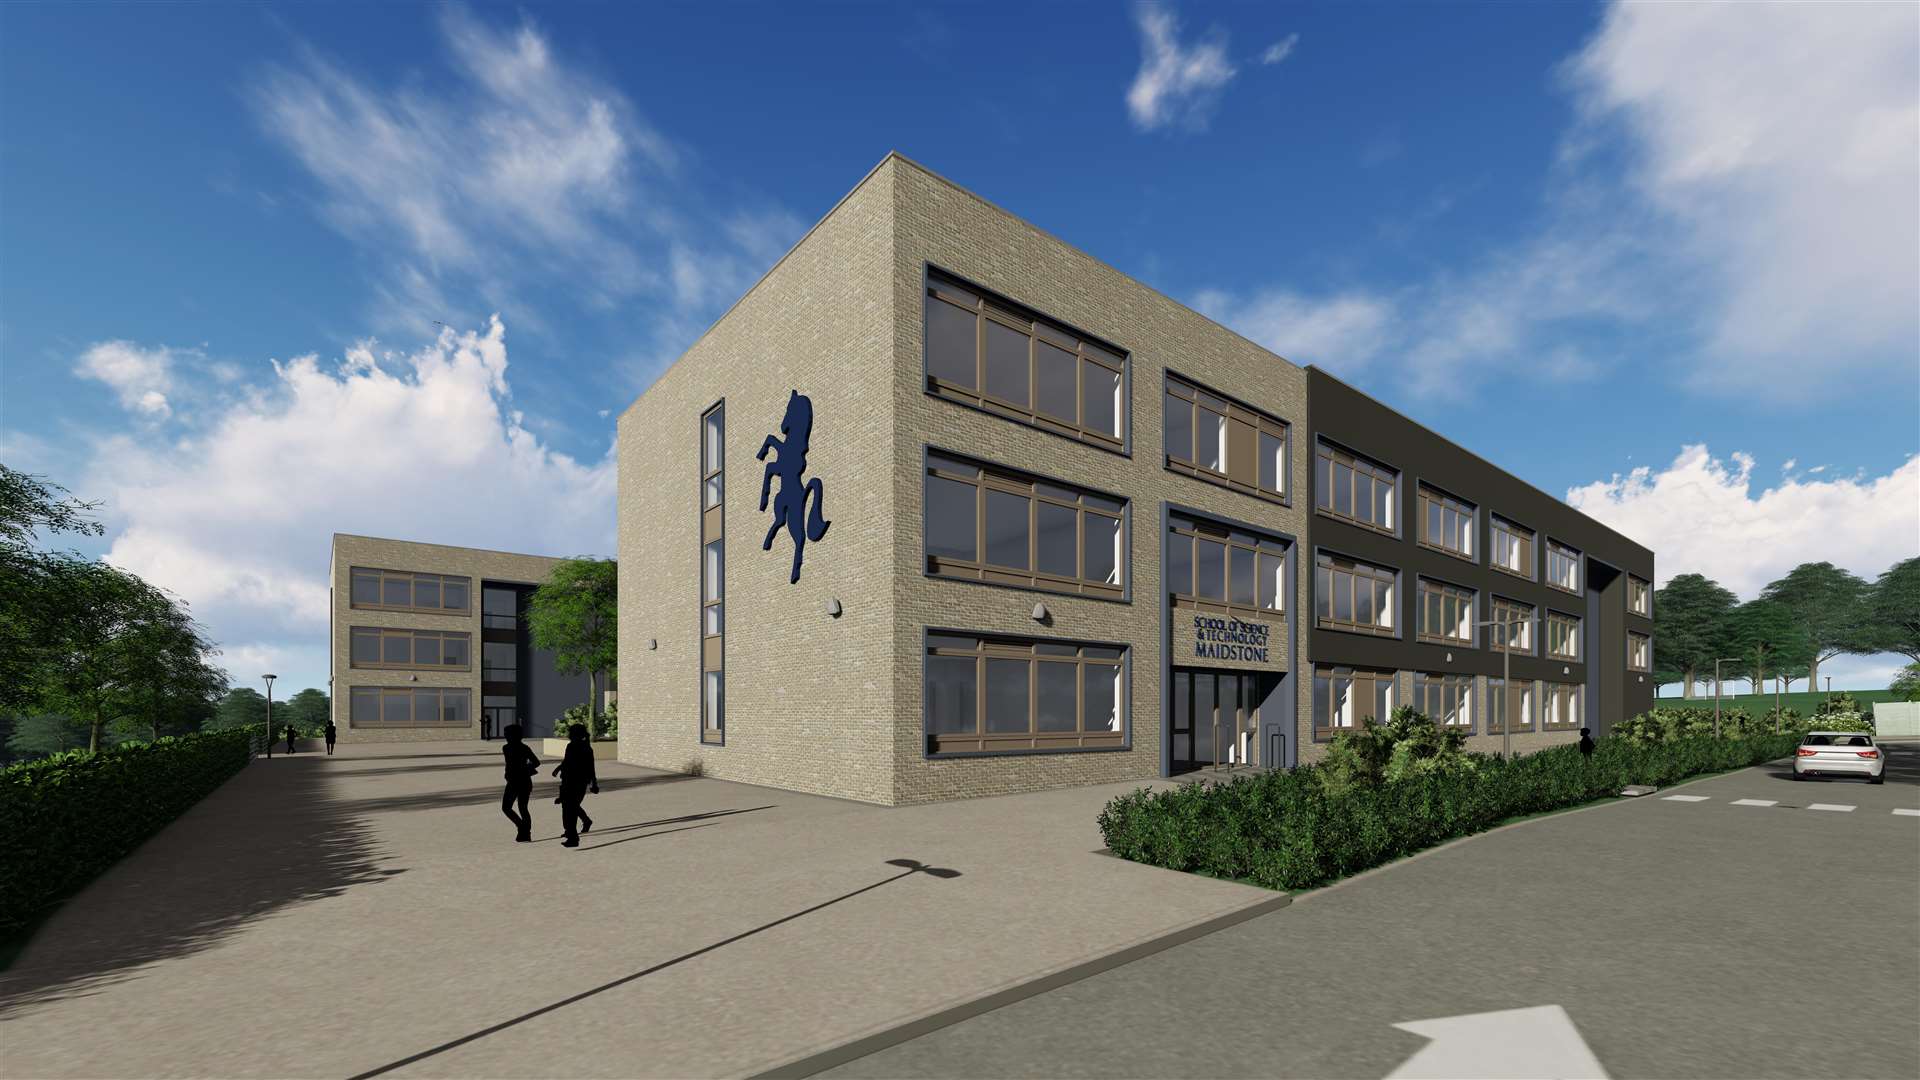 The latest artist's impression for the School of Science and Technology - Maidstone (4414713)